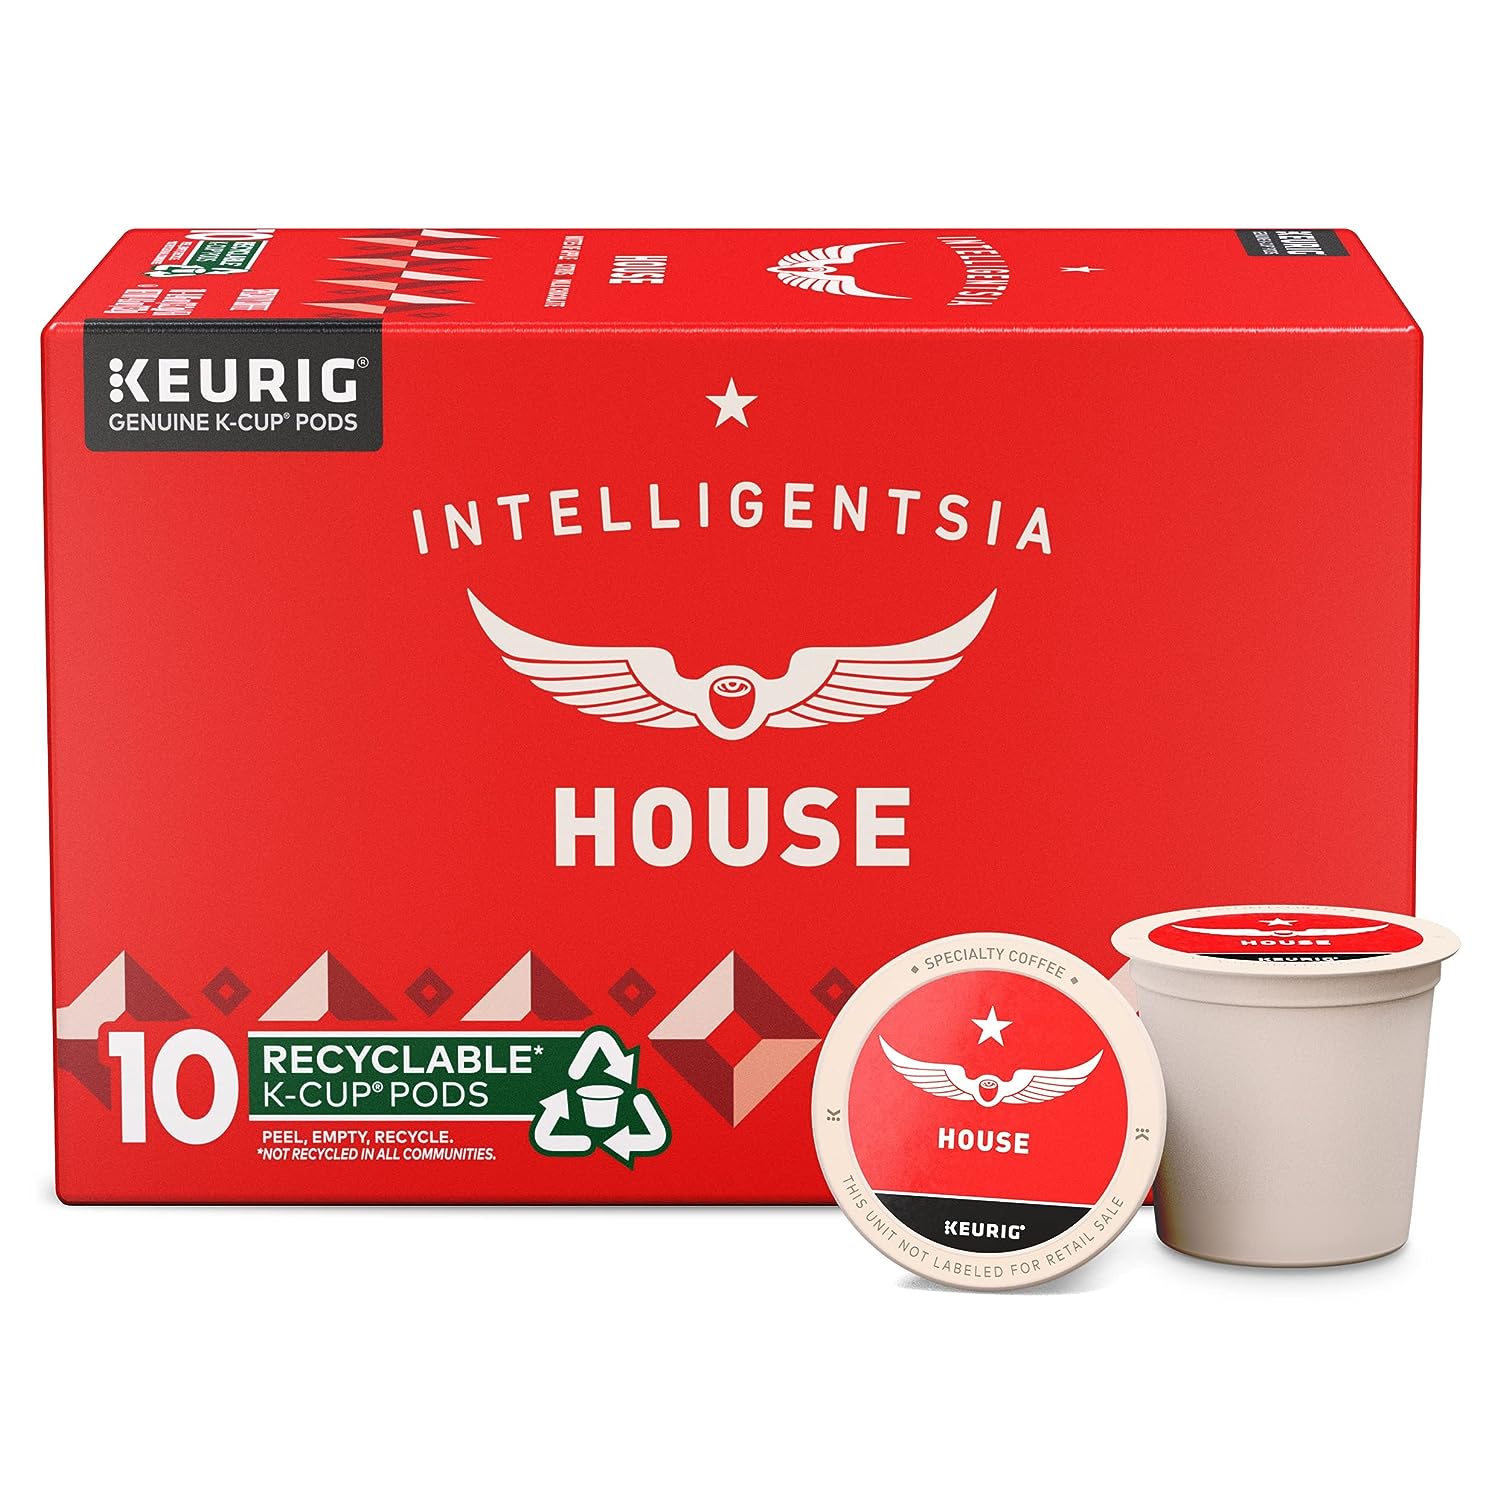 Intelligentsia Coffee, Light Roast K-Cup Pods for Keurig Brewers - House 10 Count with Flavor Notes of Milk Chocolate, Mandarin, and Apple (1 Box of 10 K-Cup Pods)